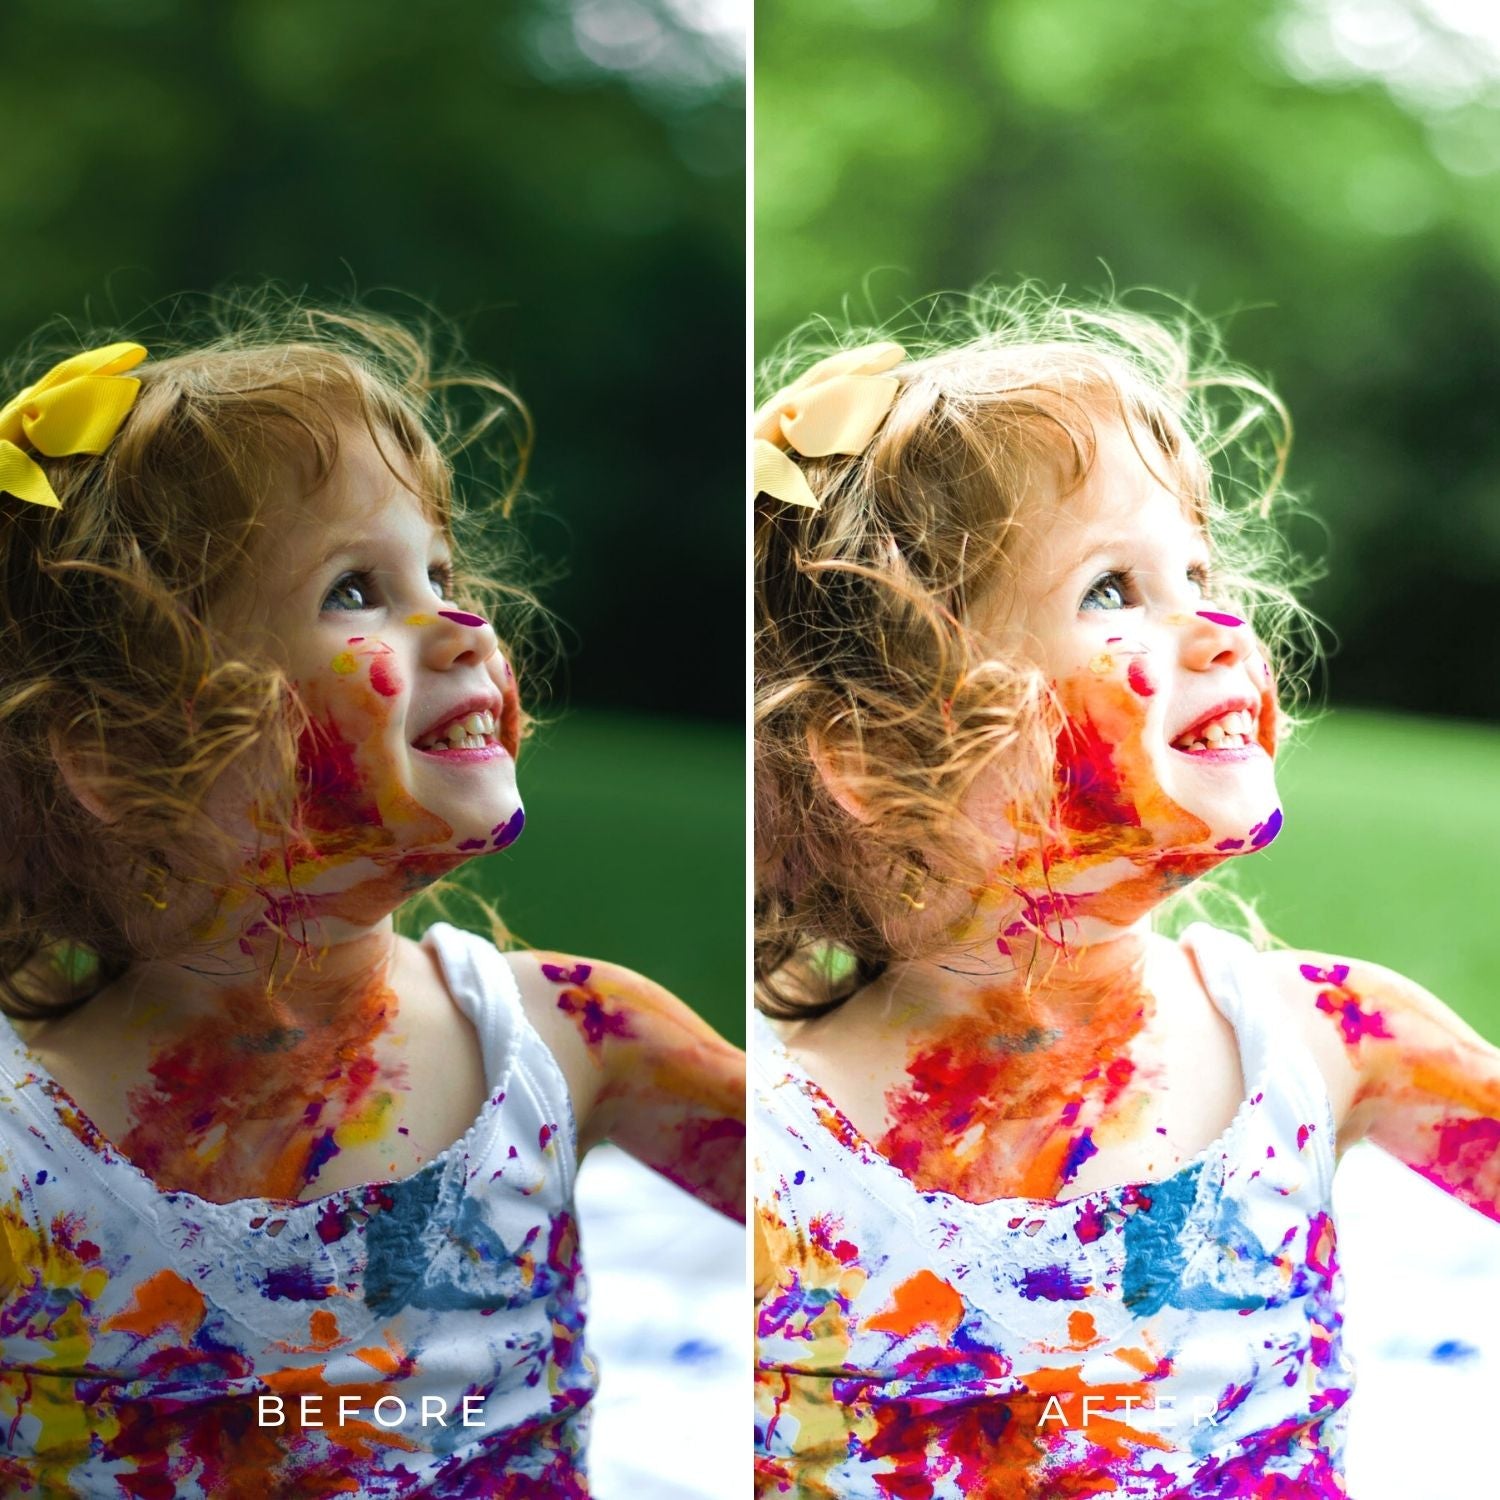 BRIGHT COLORS | Presets by Maxine Stevens